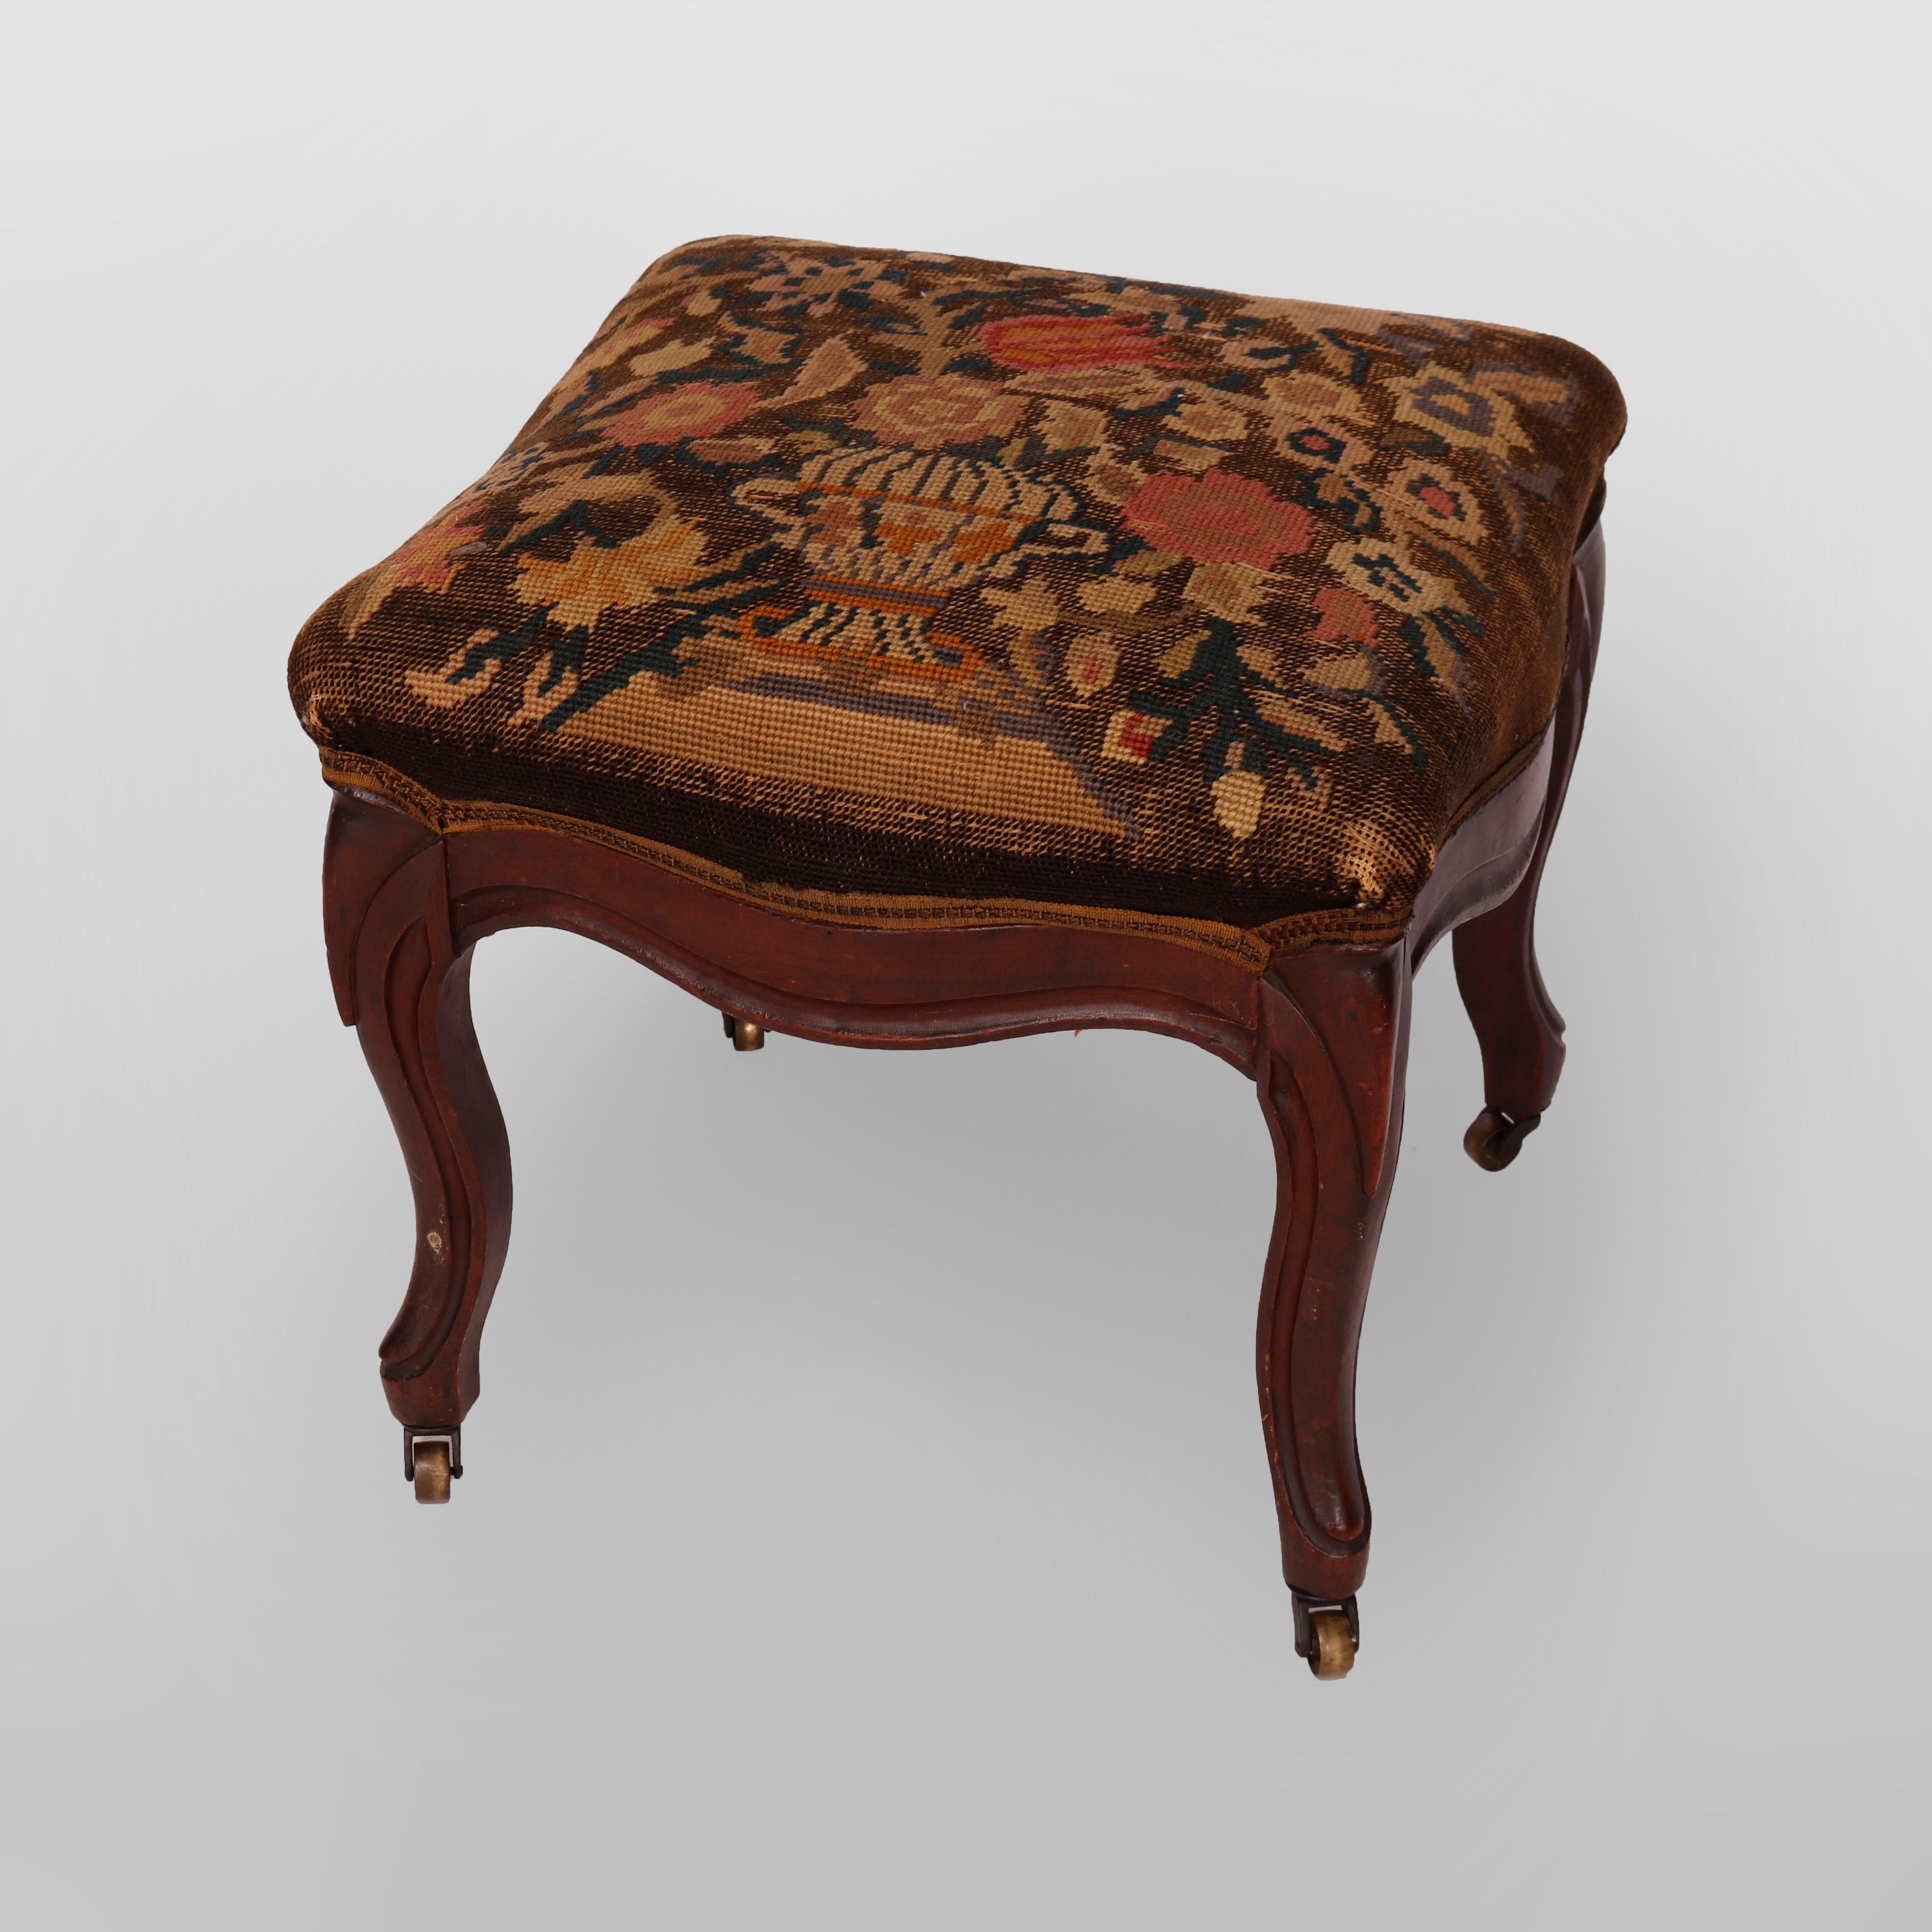 Victorian Antique Walnut Finger Carved Needlepoint Foot Stool, Circa 1890